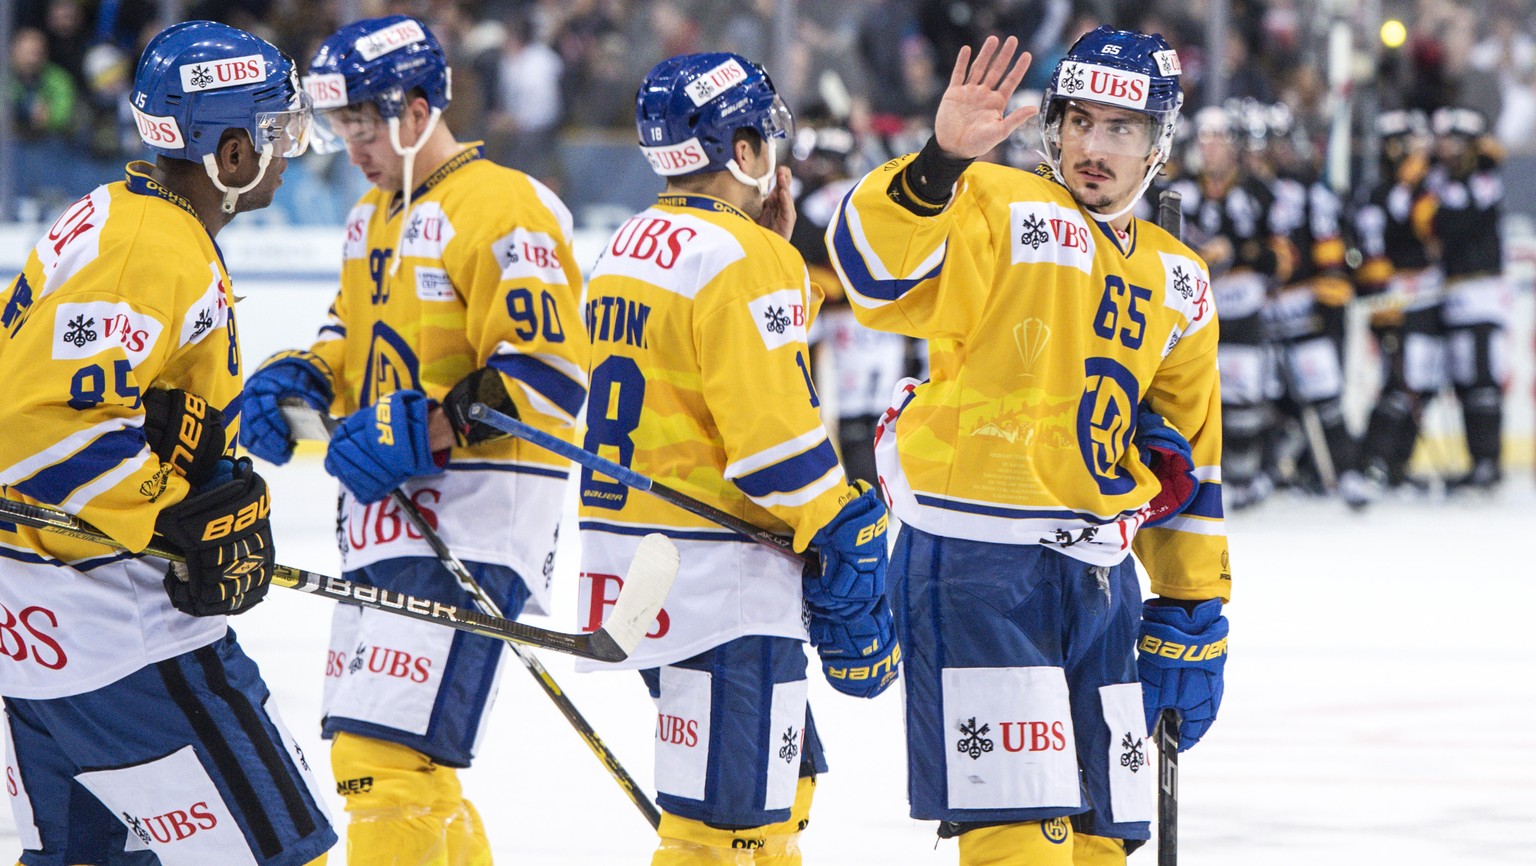 Davos&#039; Marc Wieser after the game between HC Davos and KalPa Kuopio Hockey Oy, at the 92th Spengler Cup ice hockey tournament in Davos, Switzerland, Sunday, December 30, 2018. (KEYSTONE/Melanie D ...